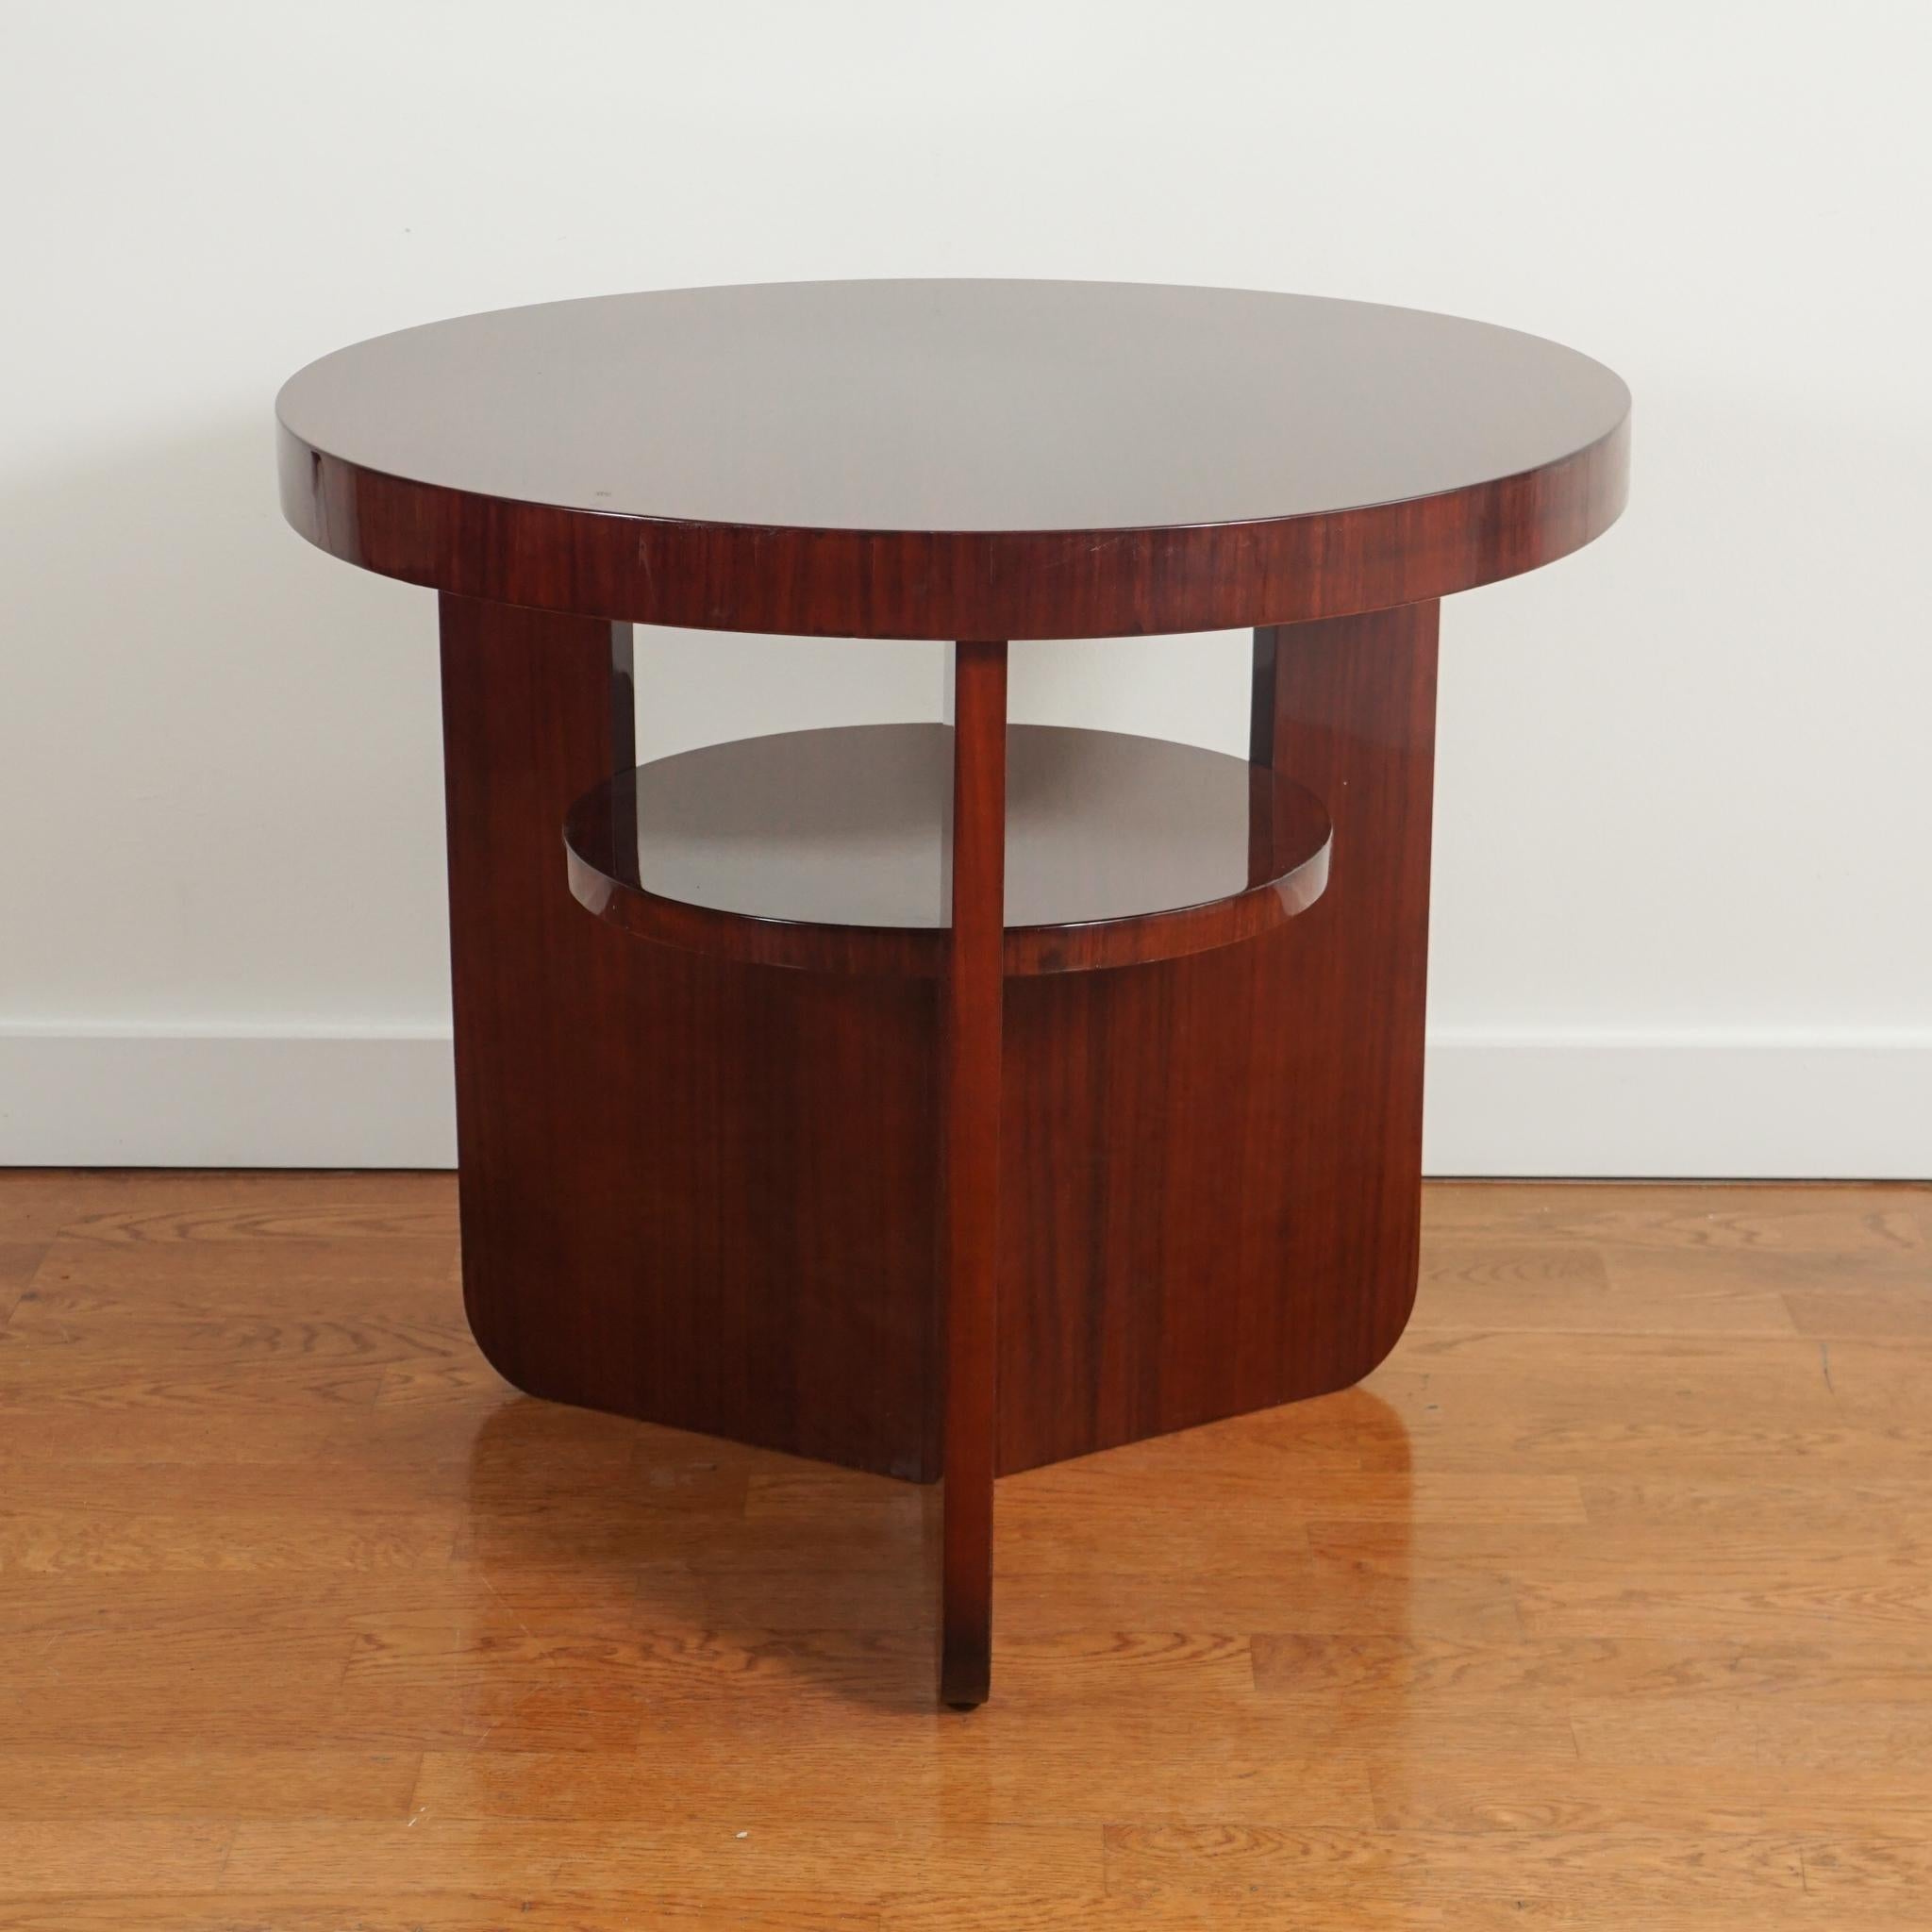 The French mahogany round side table, shown here, is from the 1930s.  Featuring an interesting triangular base with round middle shelf, the table is made even more distinctive by its rich, wood finish.  The table is in very good original condition.  